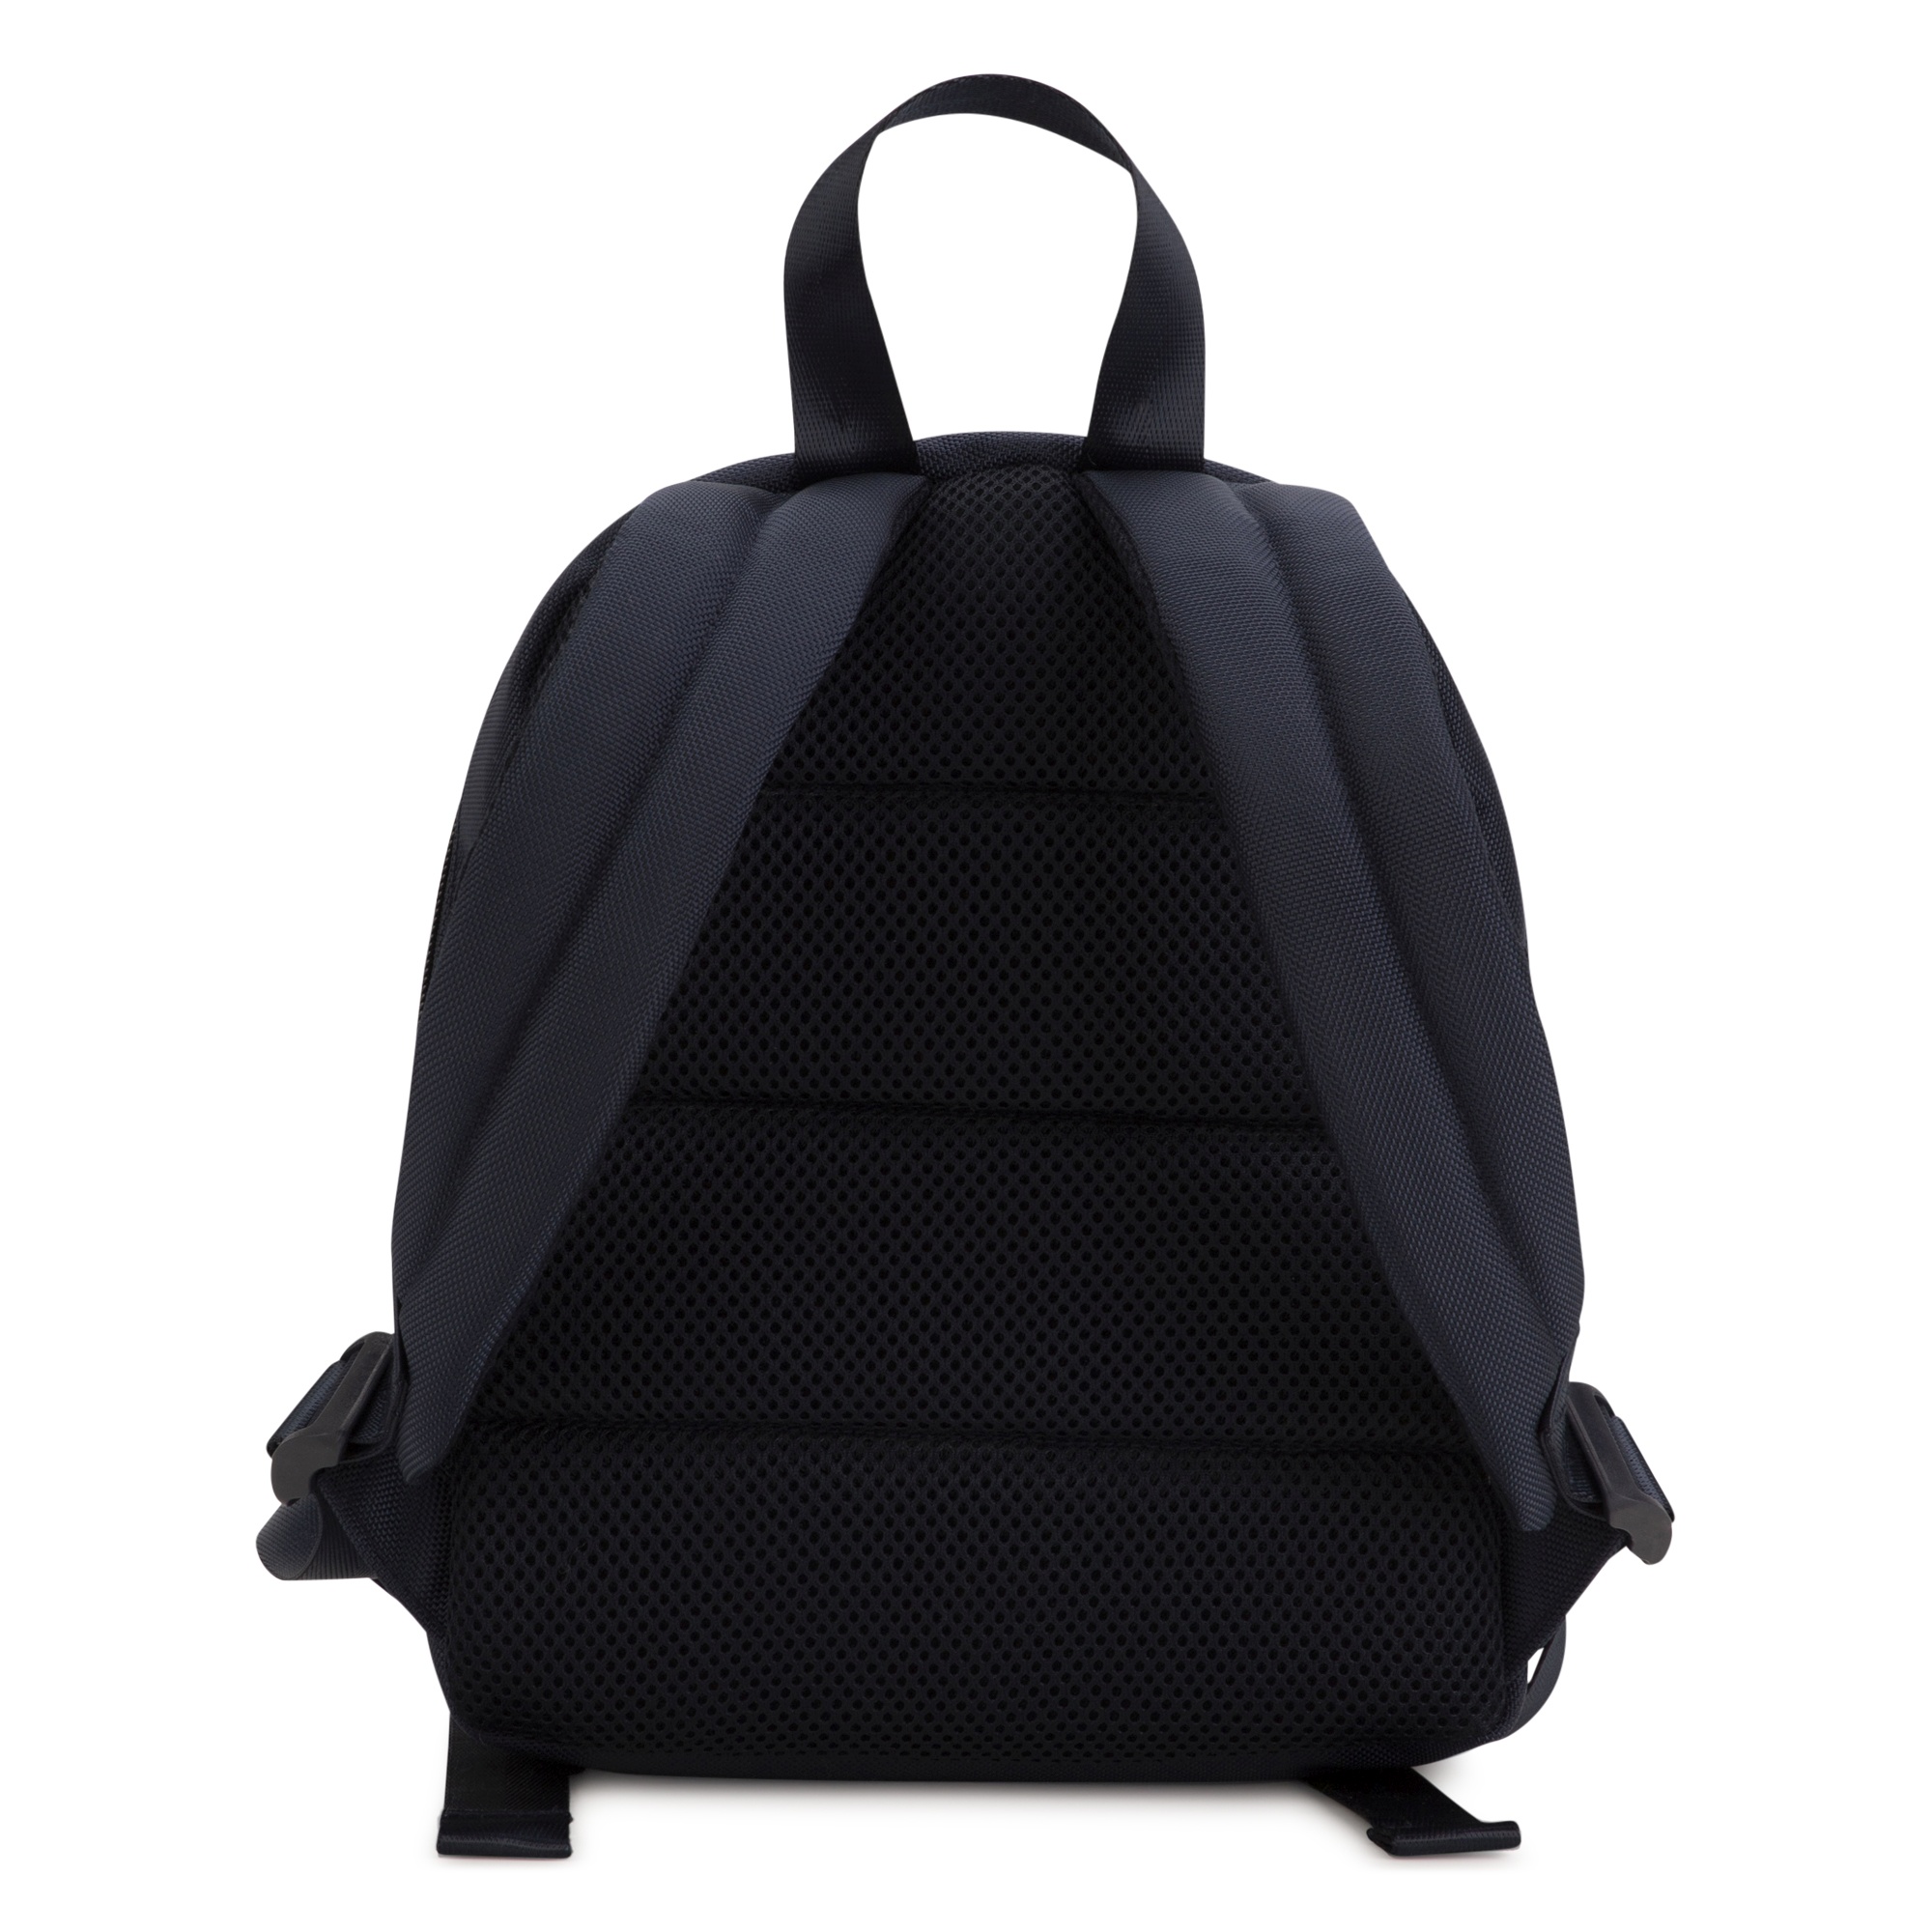 Backpack with logo BOSS for BOY